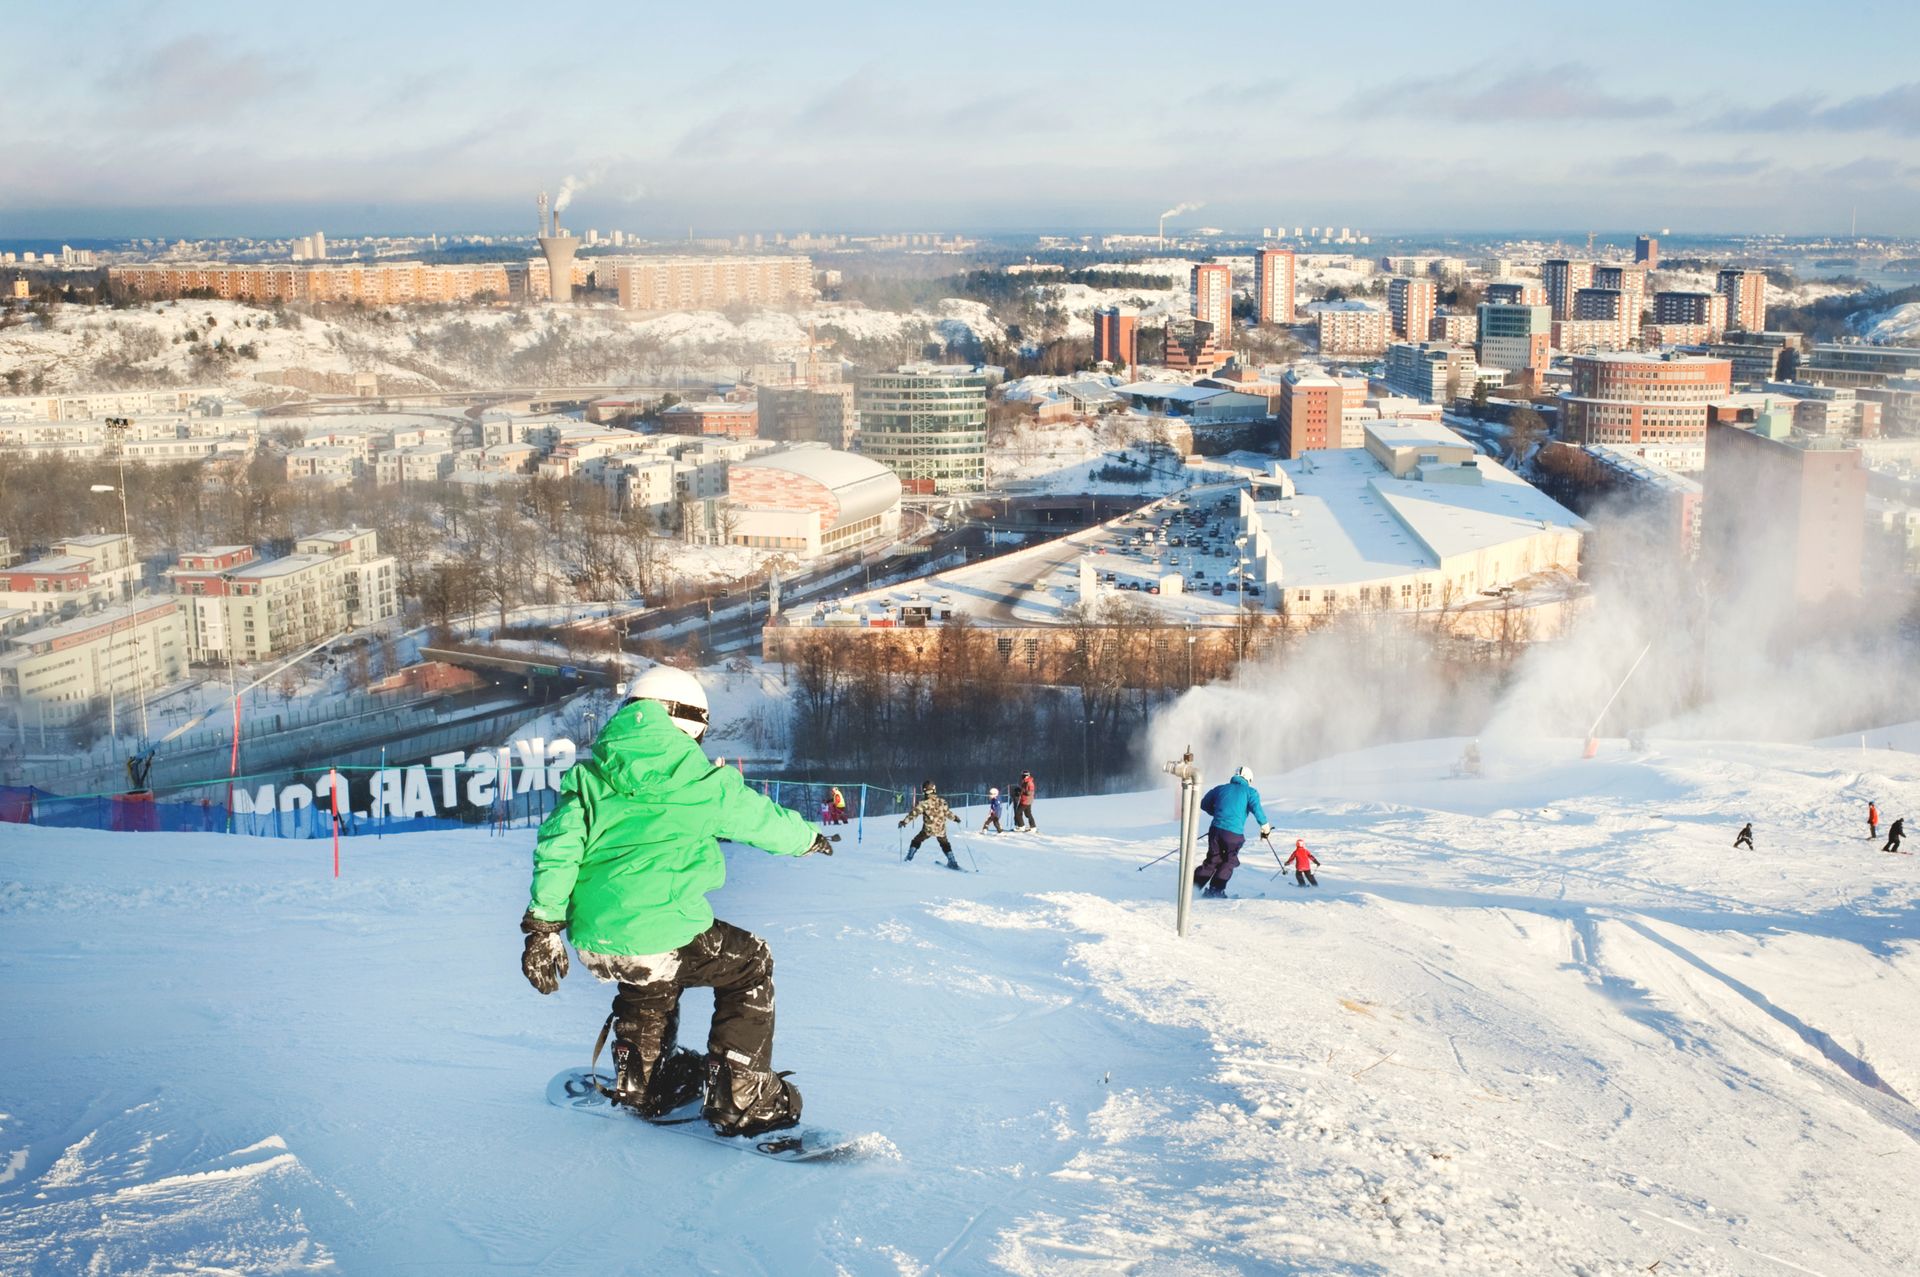 Skiers and snowboarders on a ski hill overlooking Stockholm.